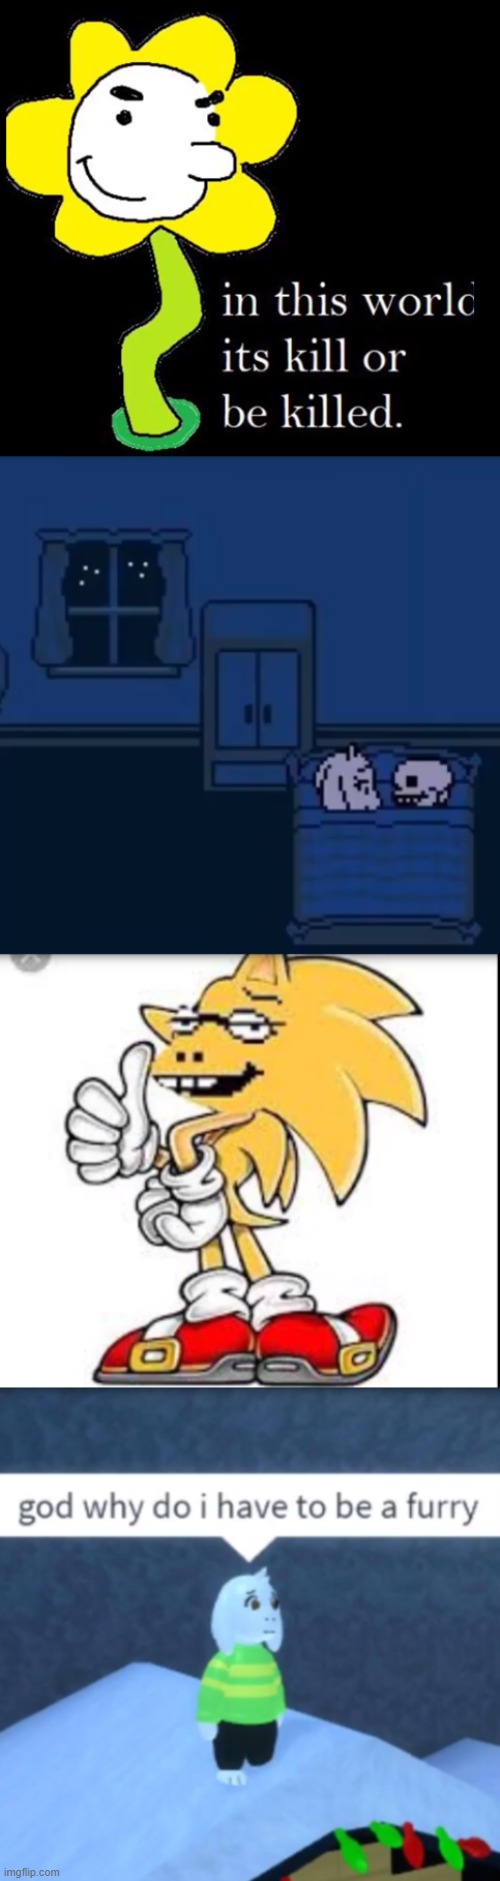 Cursed Undertale Images p5 (Finale) | image tagged in cursed,undertale,images,you'll need unsee juice | made w/ Imgflip meme maker